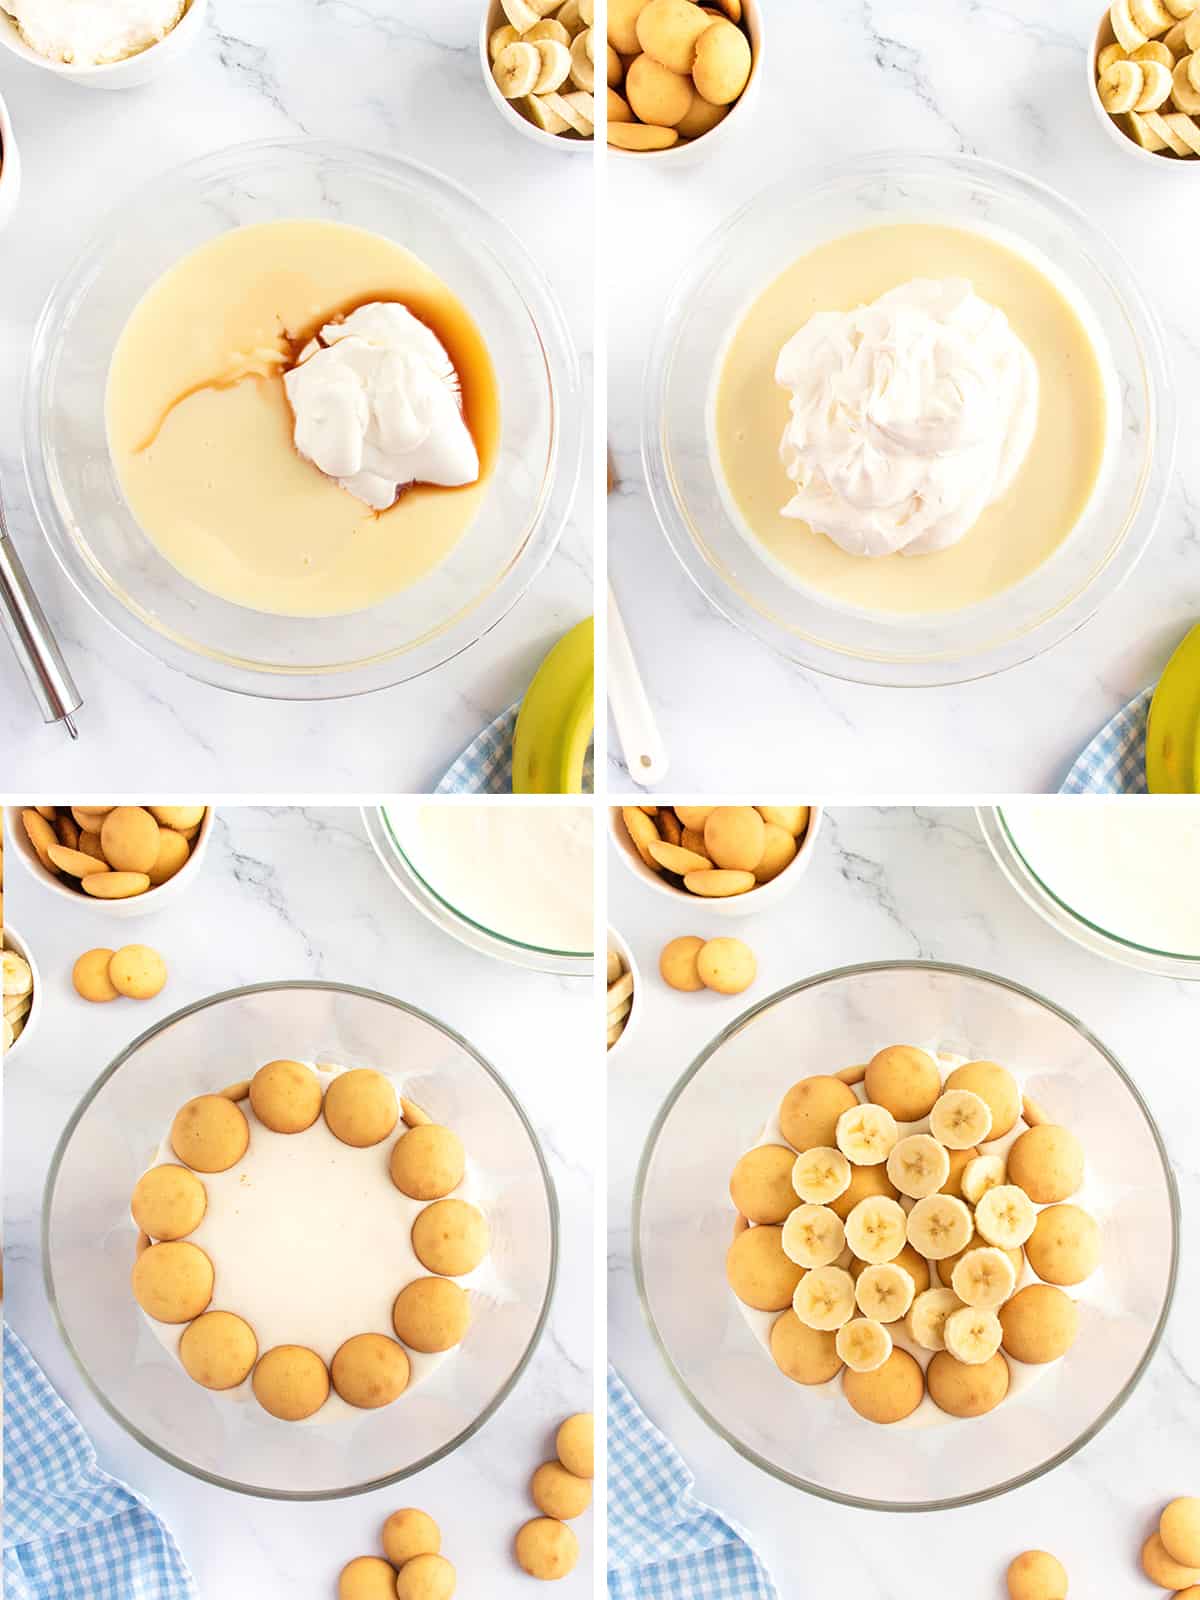 The Best Banana Pudding by The BakerMama